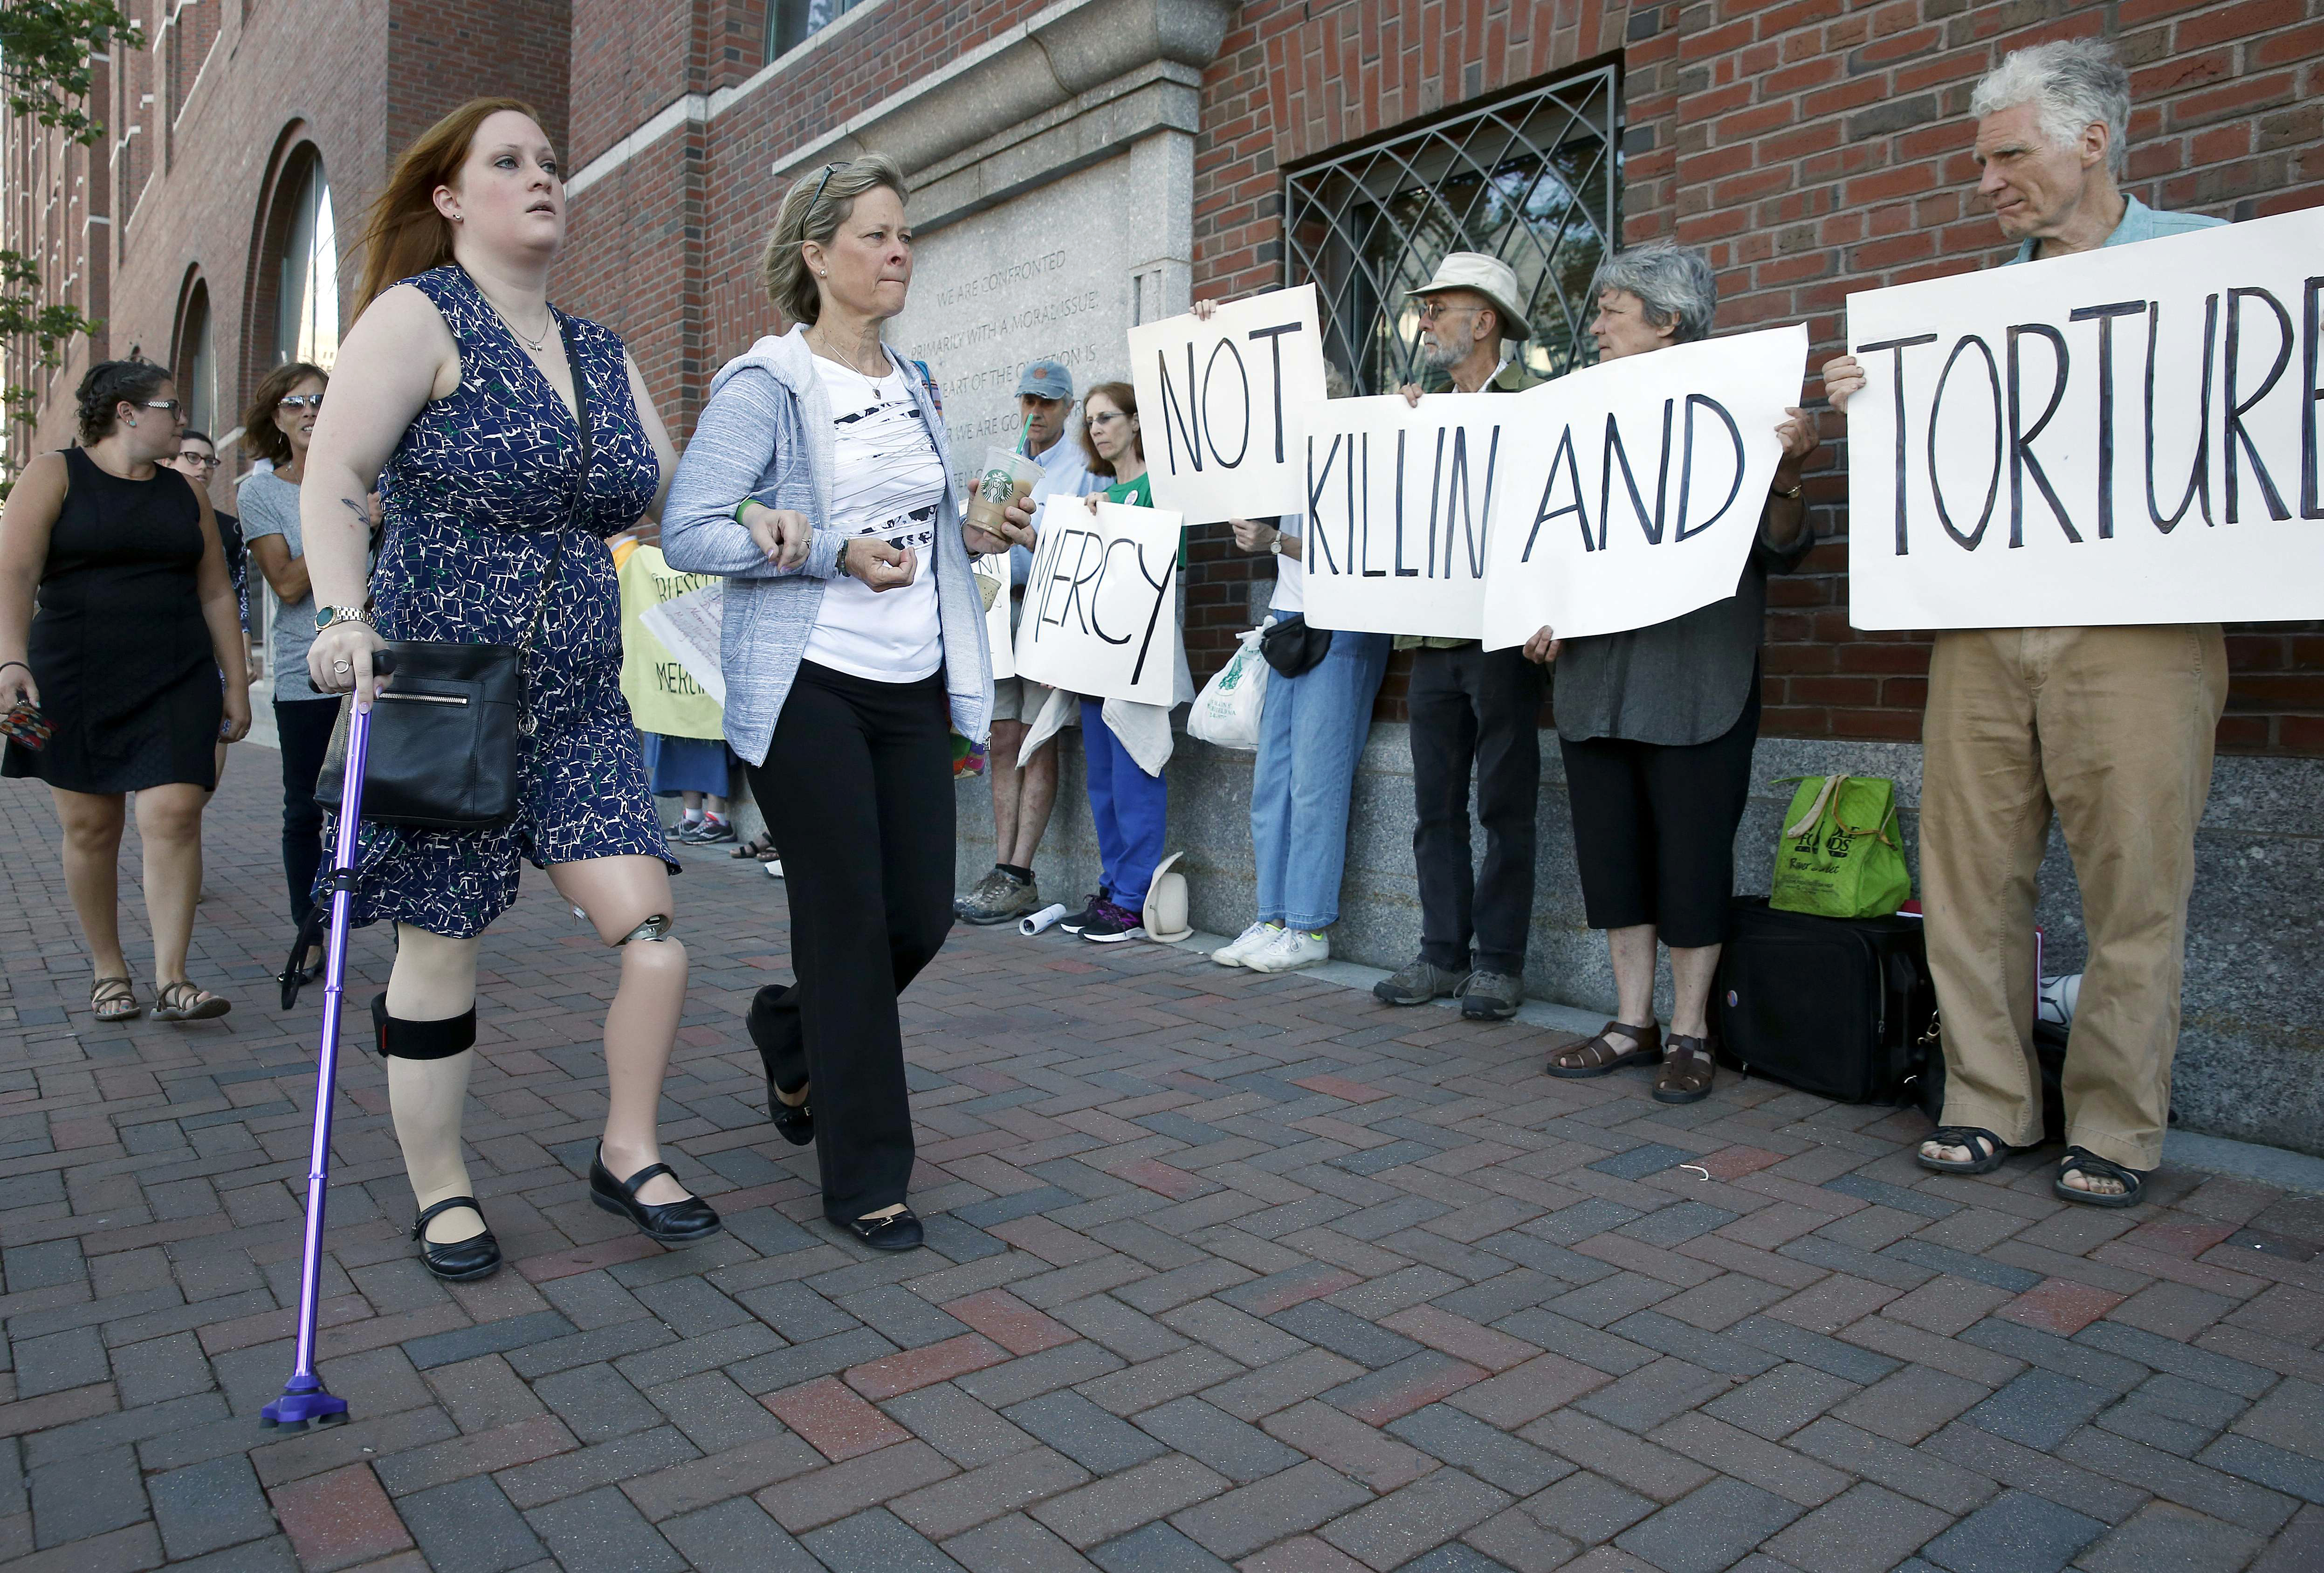 Boston Marathon bombing victim Erika Brannock, foreground left, and her mother Carol Downing, foreground right, walk past demonstrators outside federal court in Boston, Wednesday, June 24, 2015. More than 20 victims of the Boston Marathon bombing and their family members are expected to address the court regarding the attack's impact on their lives before a judge formally sentences bomber Dzhokhar Tsarnaev to death. (AP Photo/Michael Dwyer)